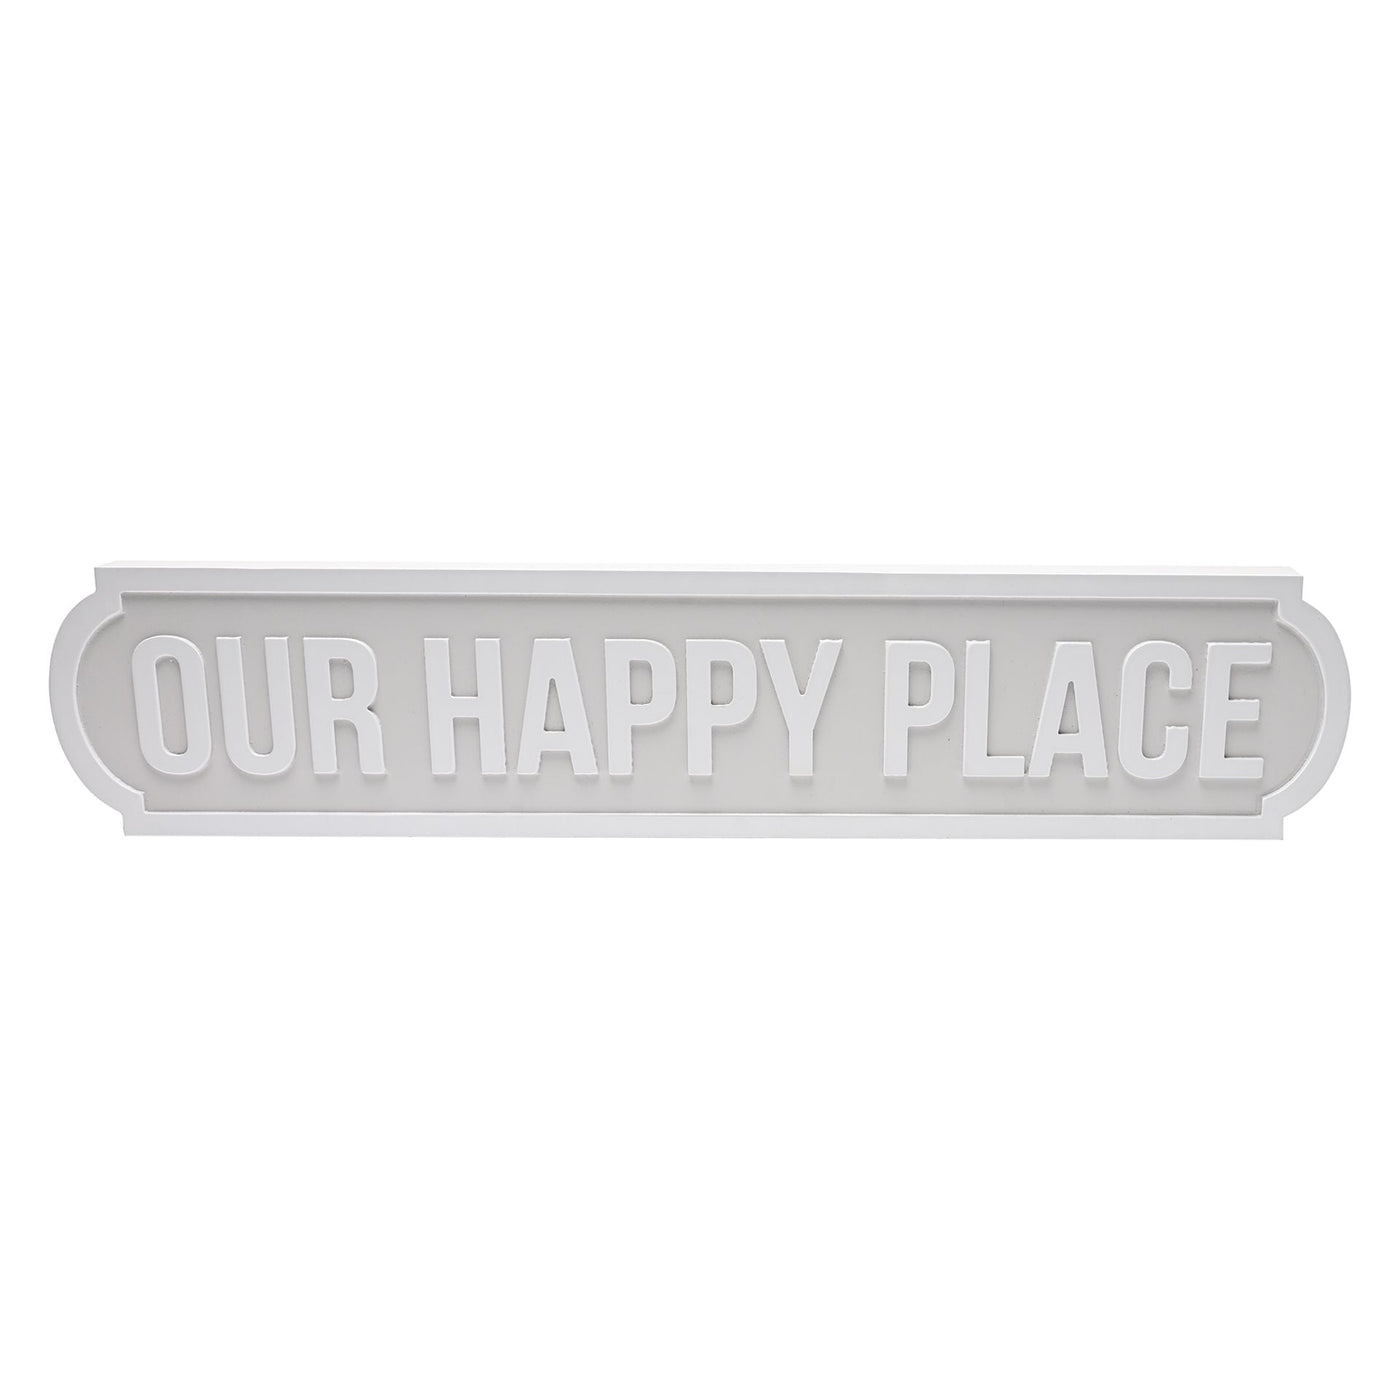 Our Happy Place Street Sign